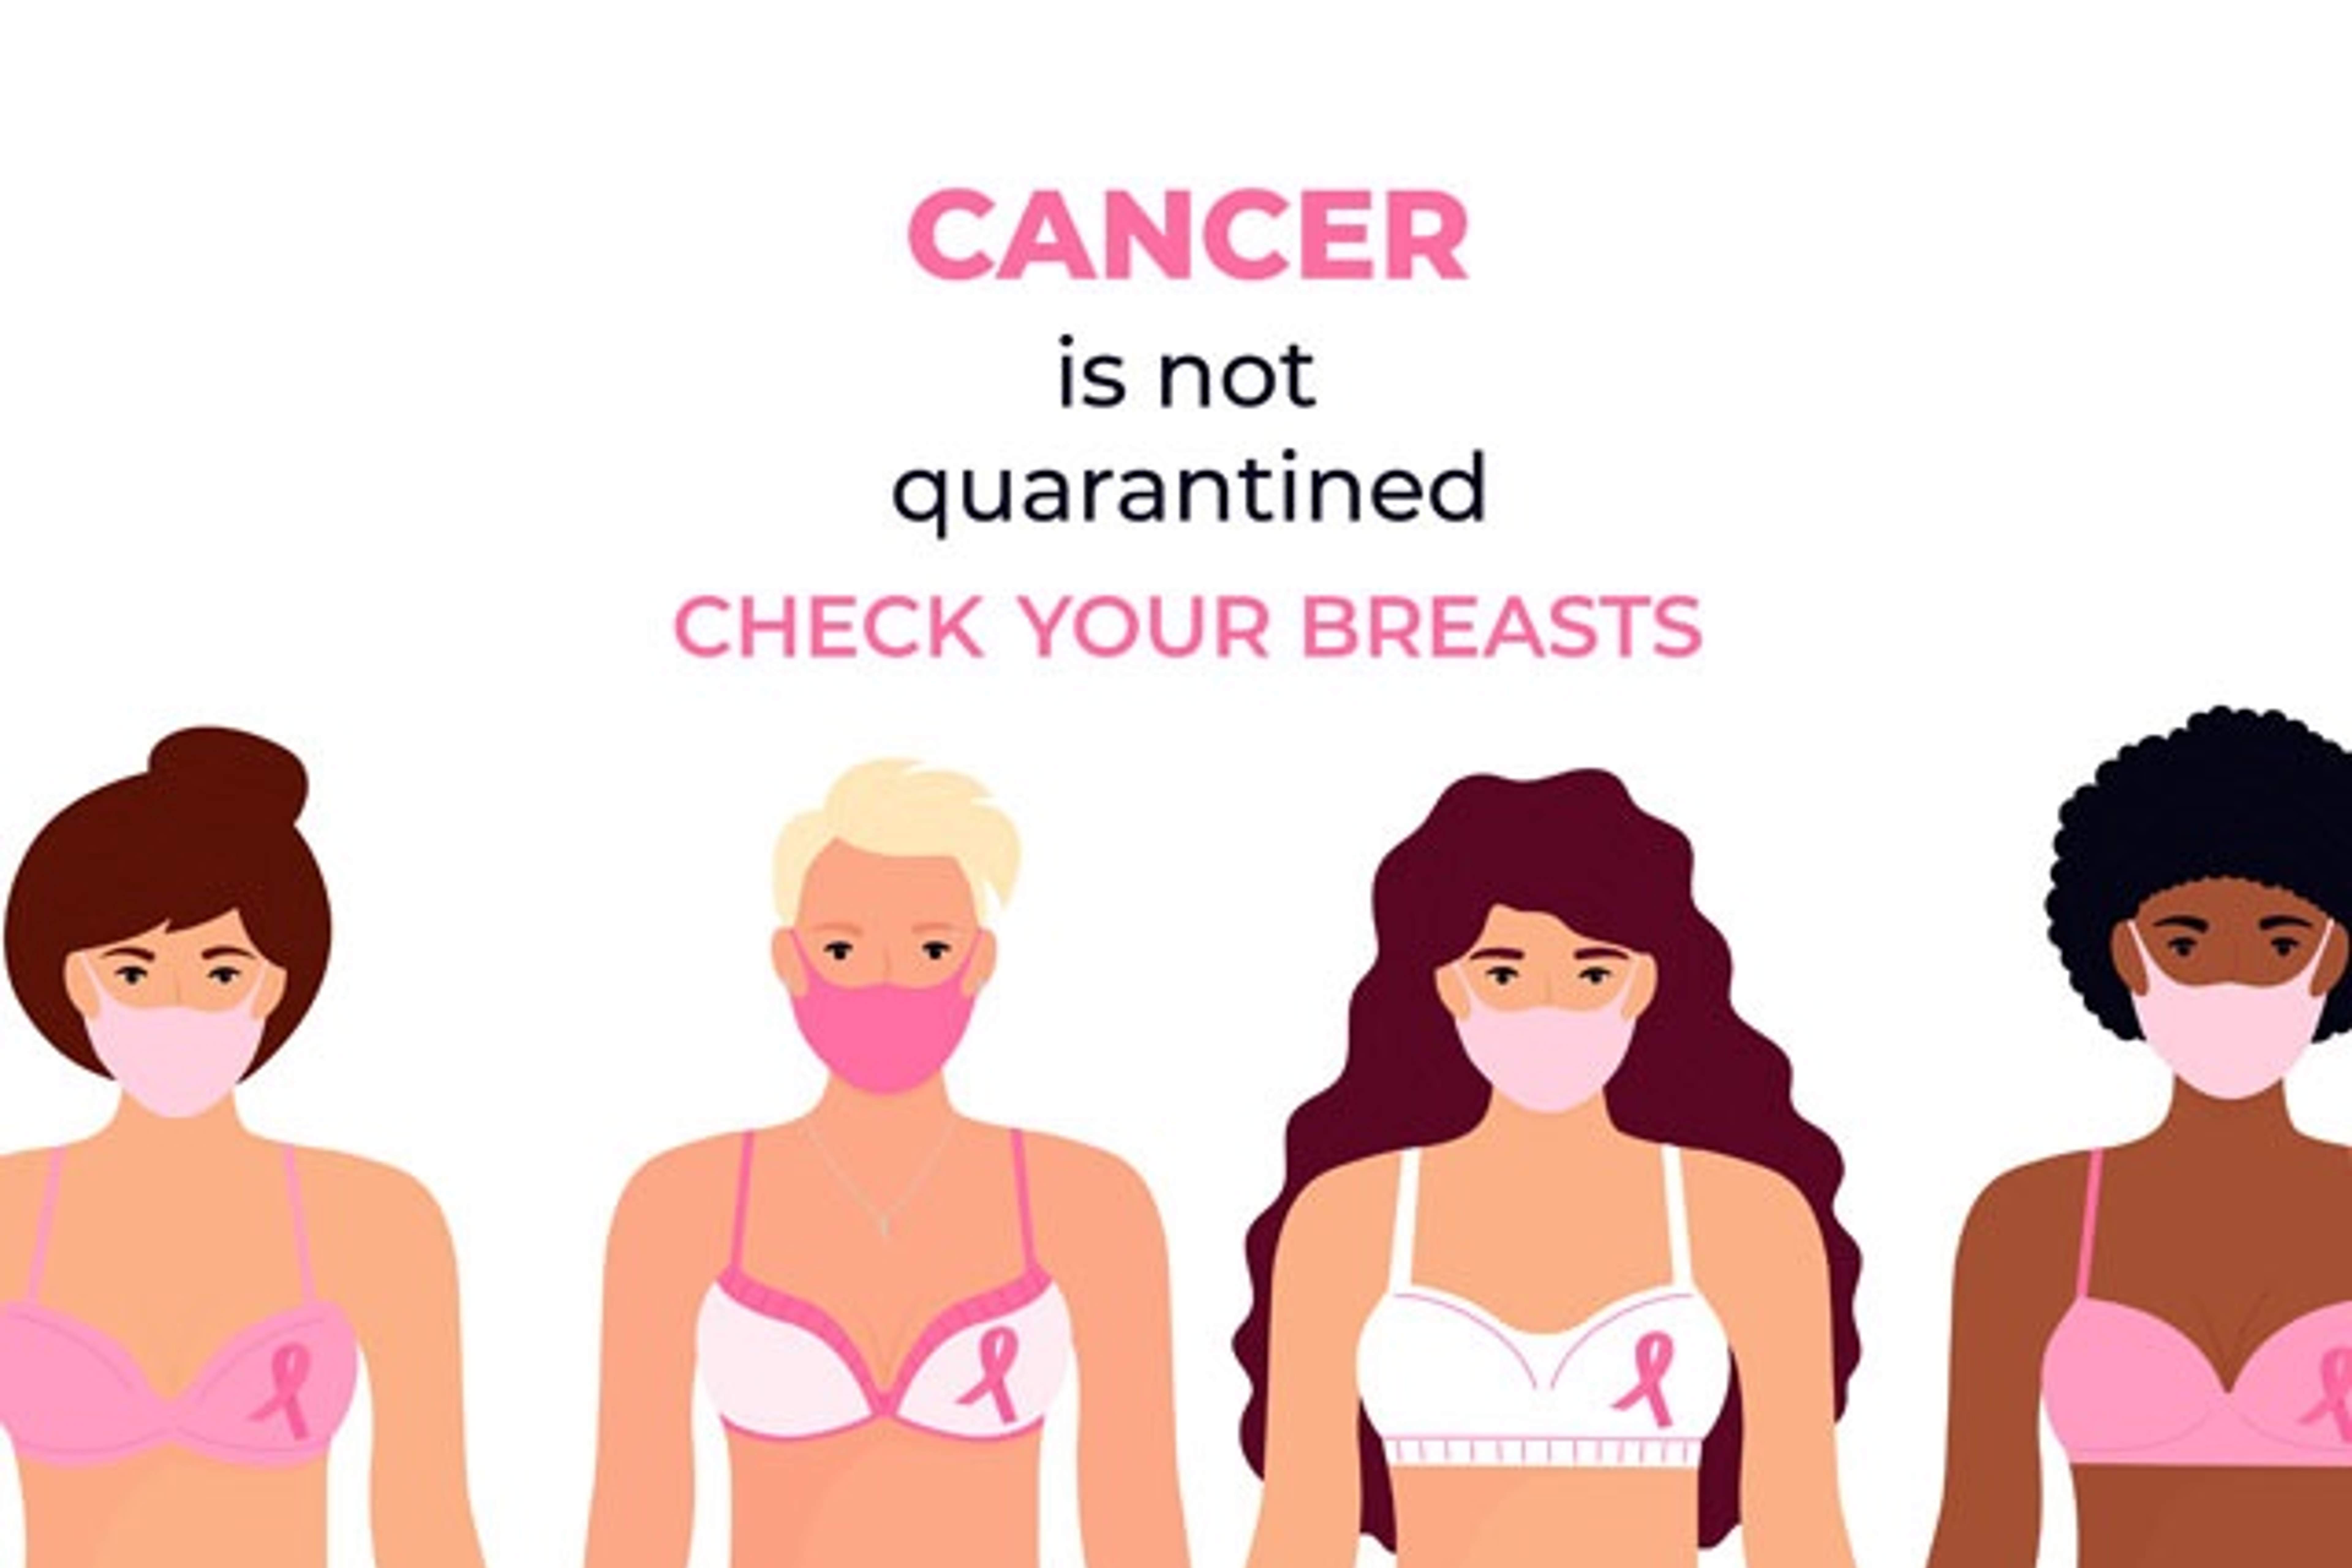 Illustration of women of different races with bras and masks on with the text, "cancer is not quarantined, check your breasts".